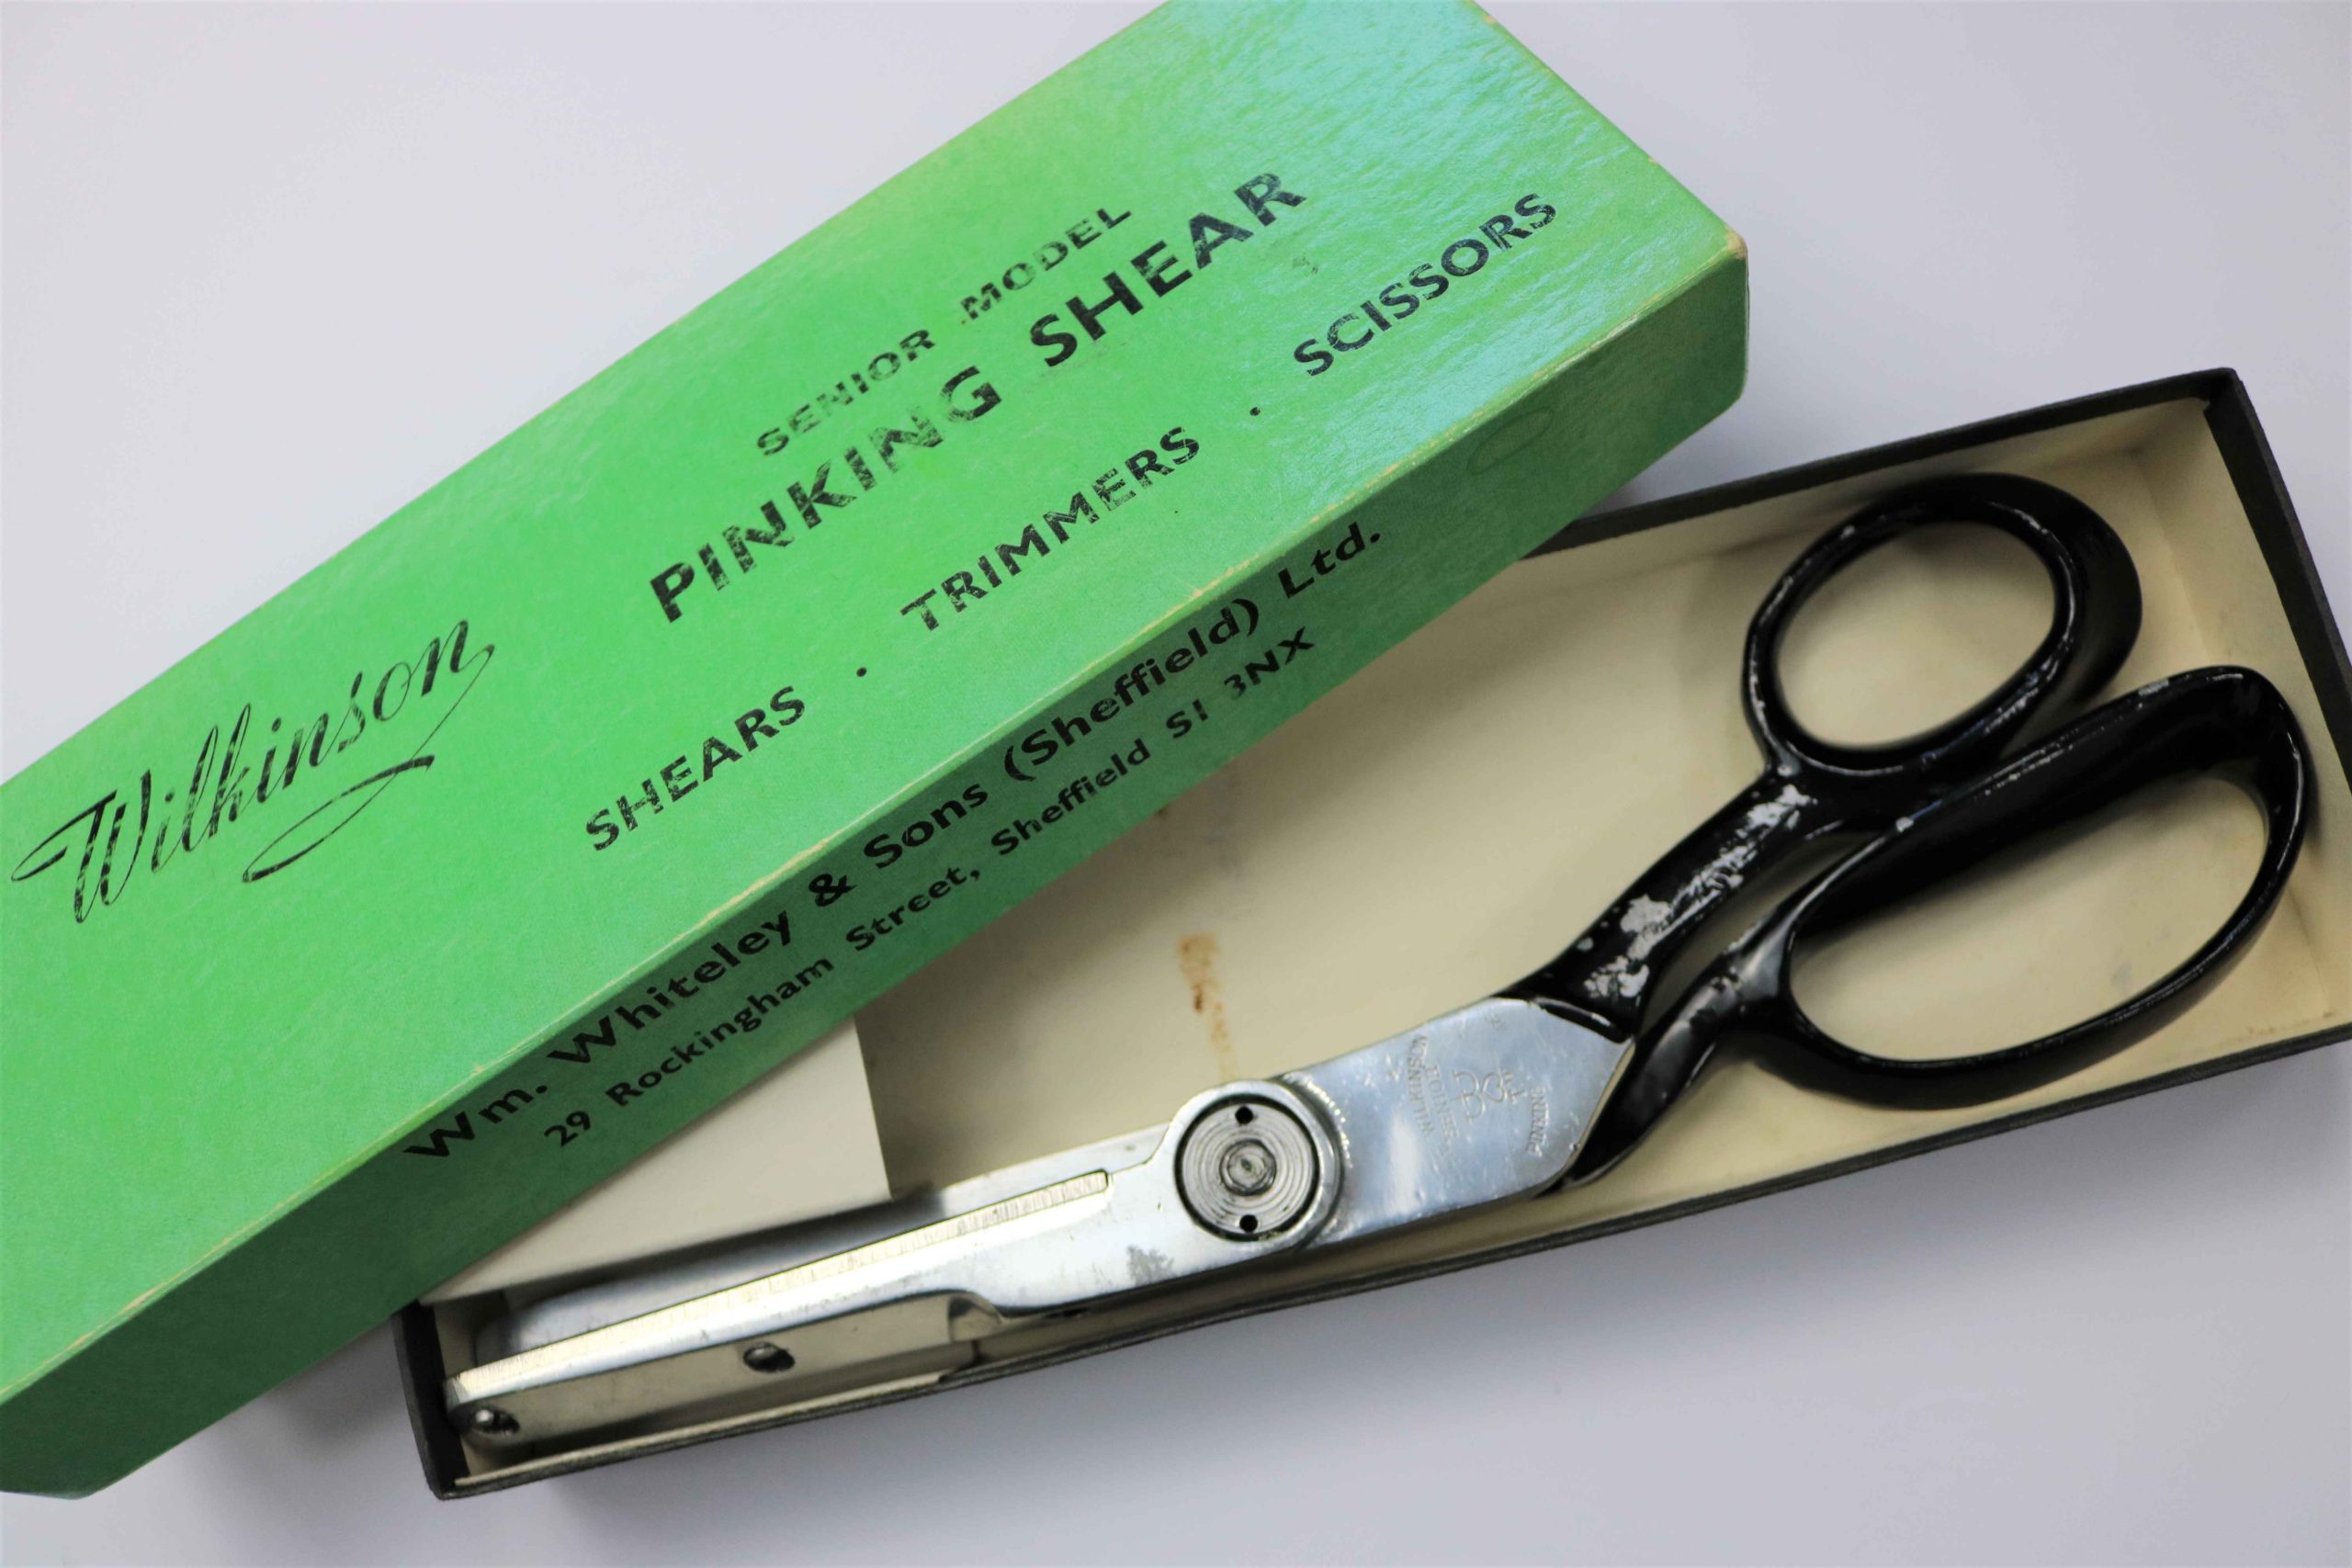 Whiteley's vintage pinking scissors with iconic green box.